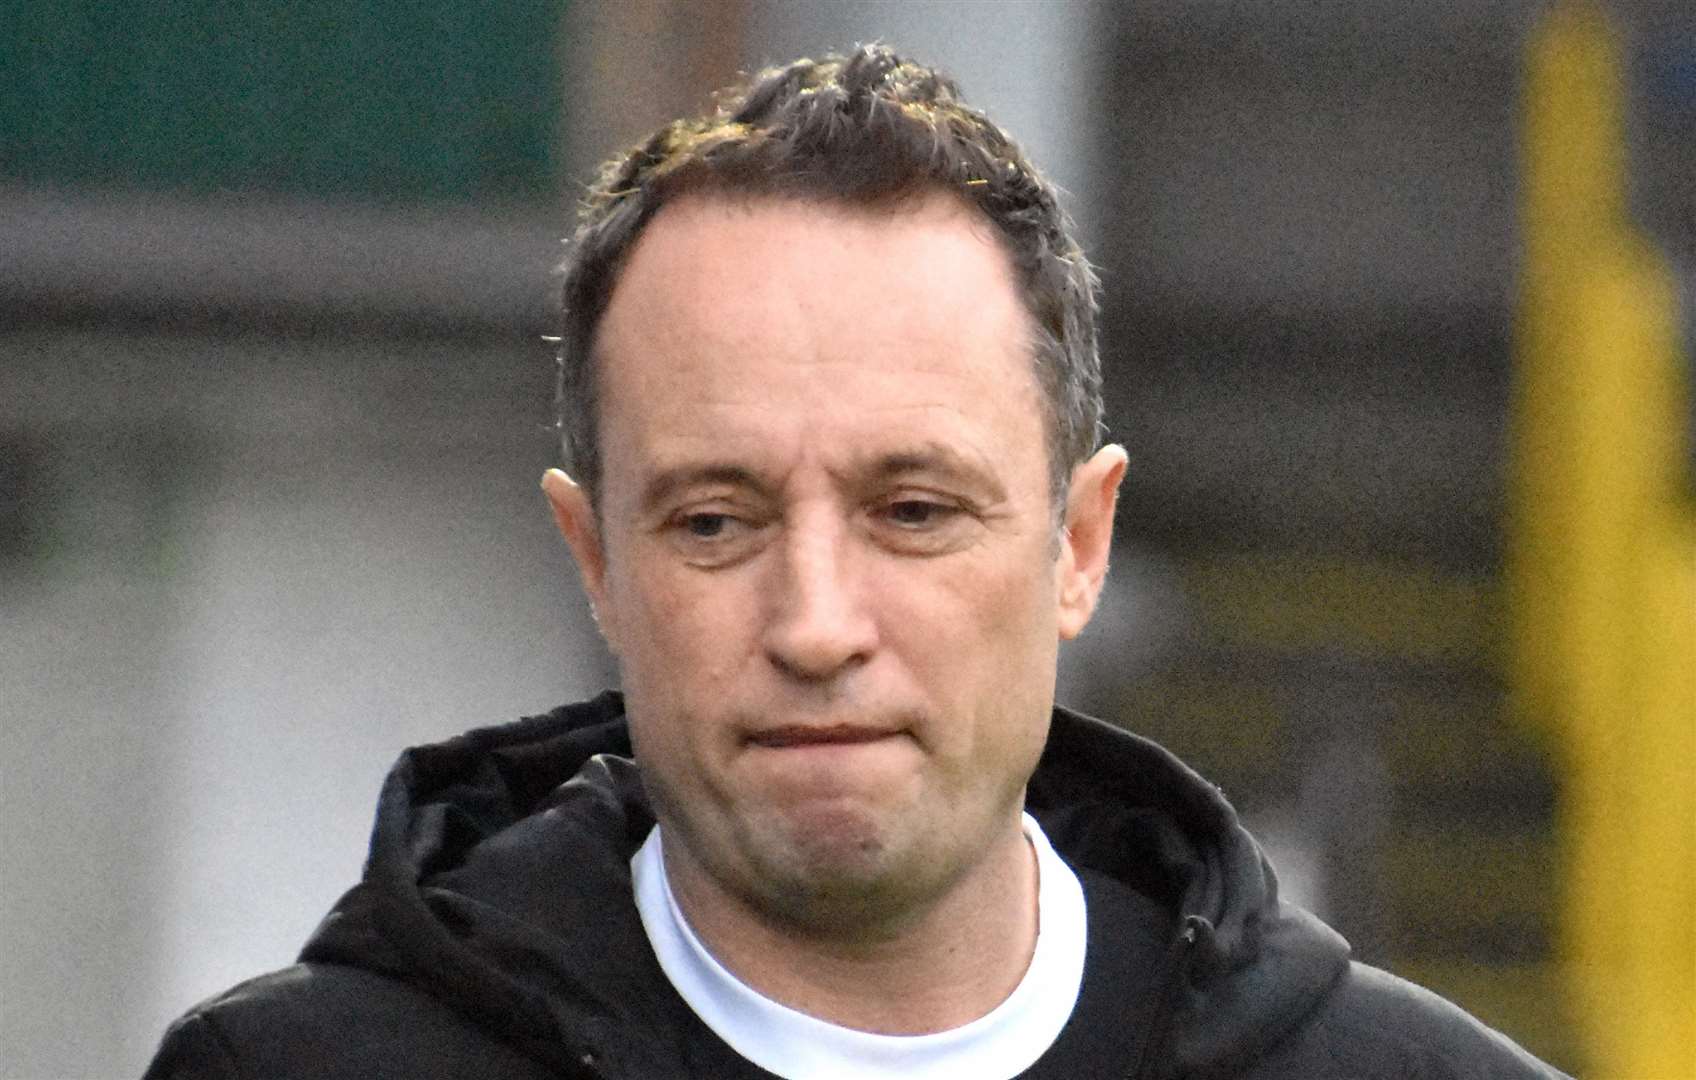 Dover Athletic manager Jake Leberl. Picture: Randolph File